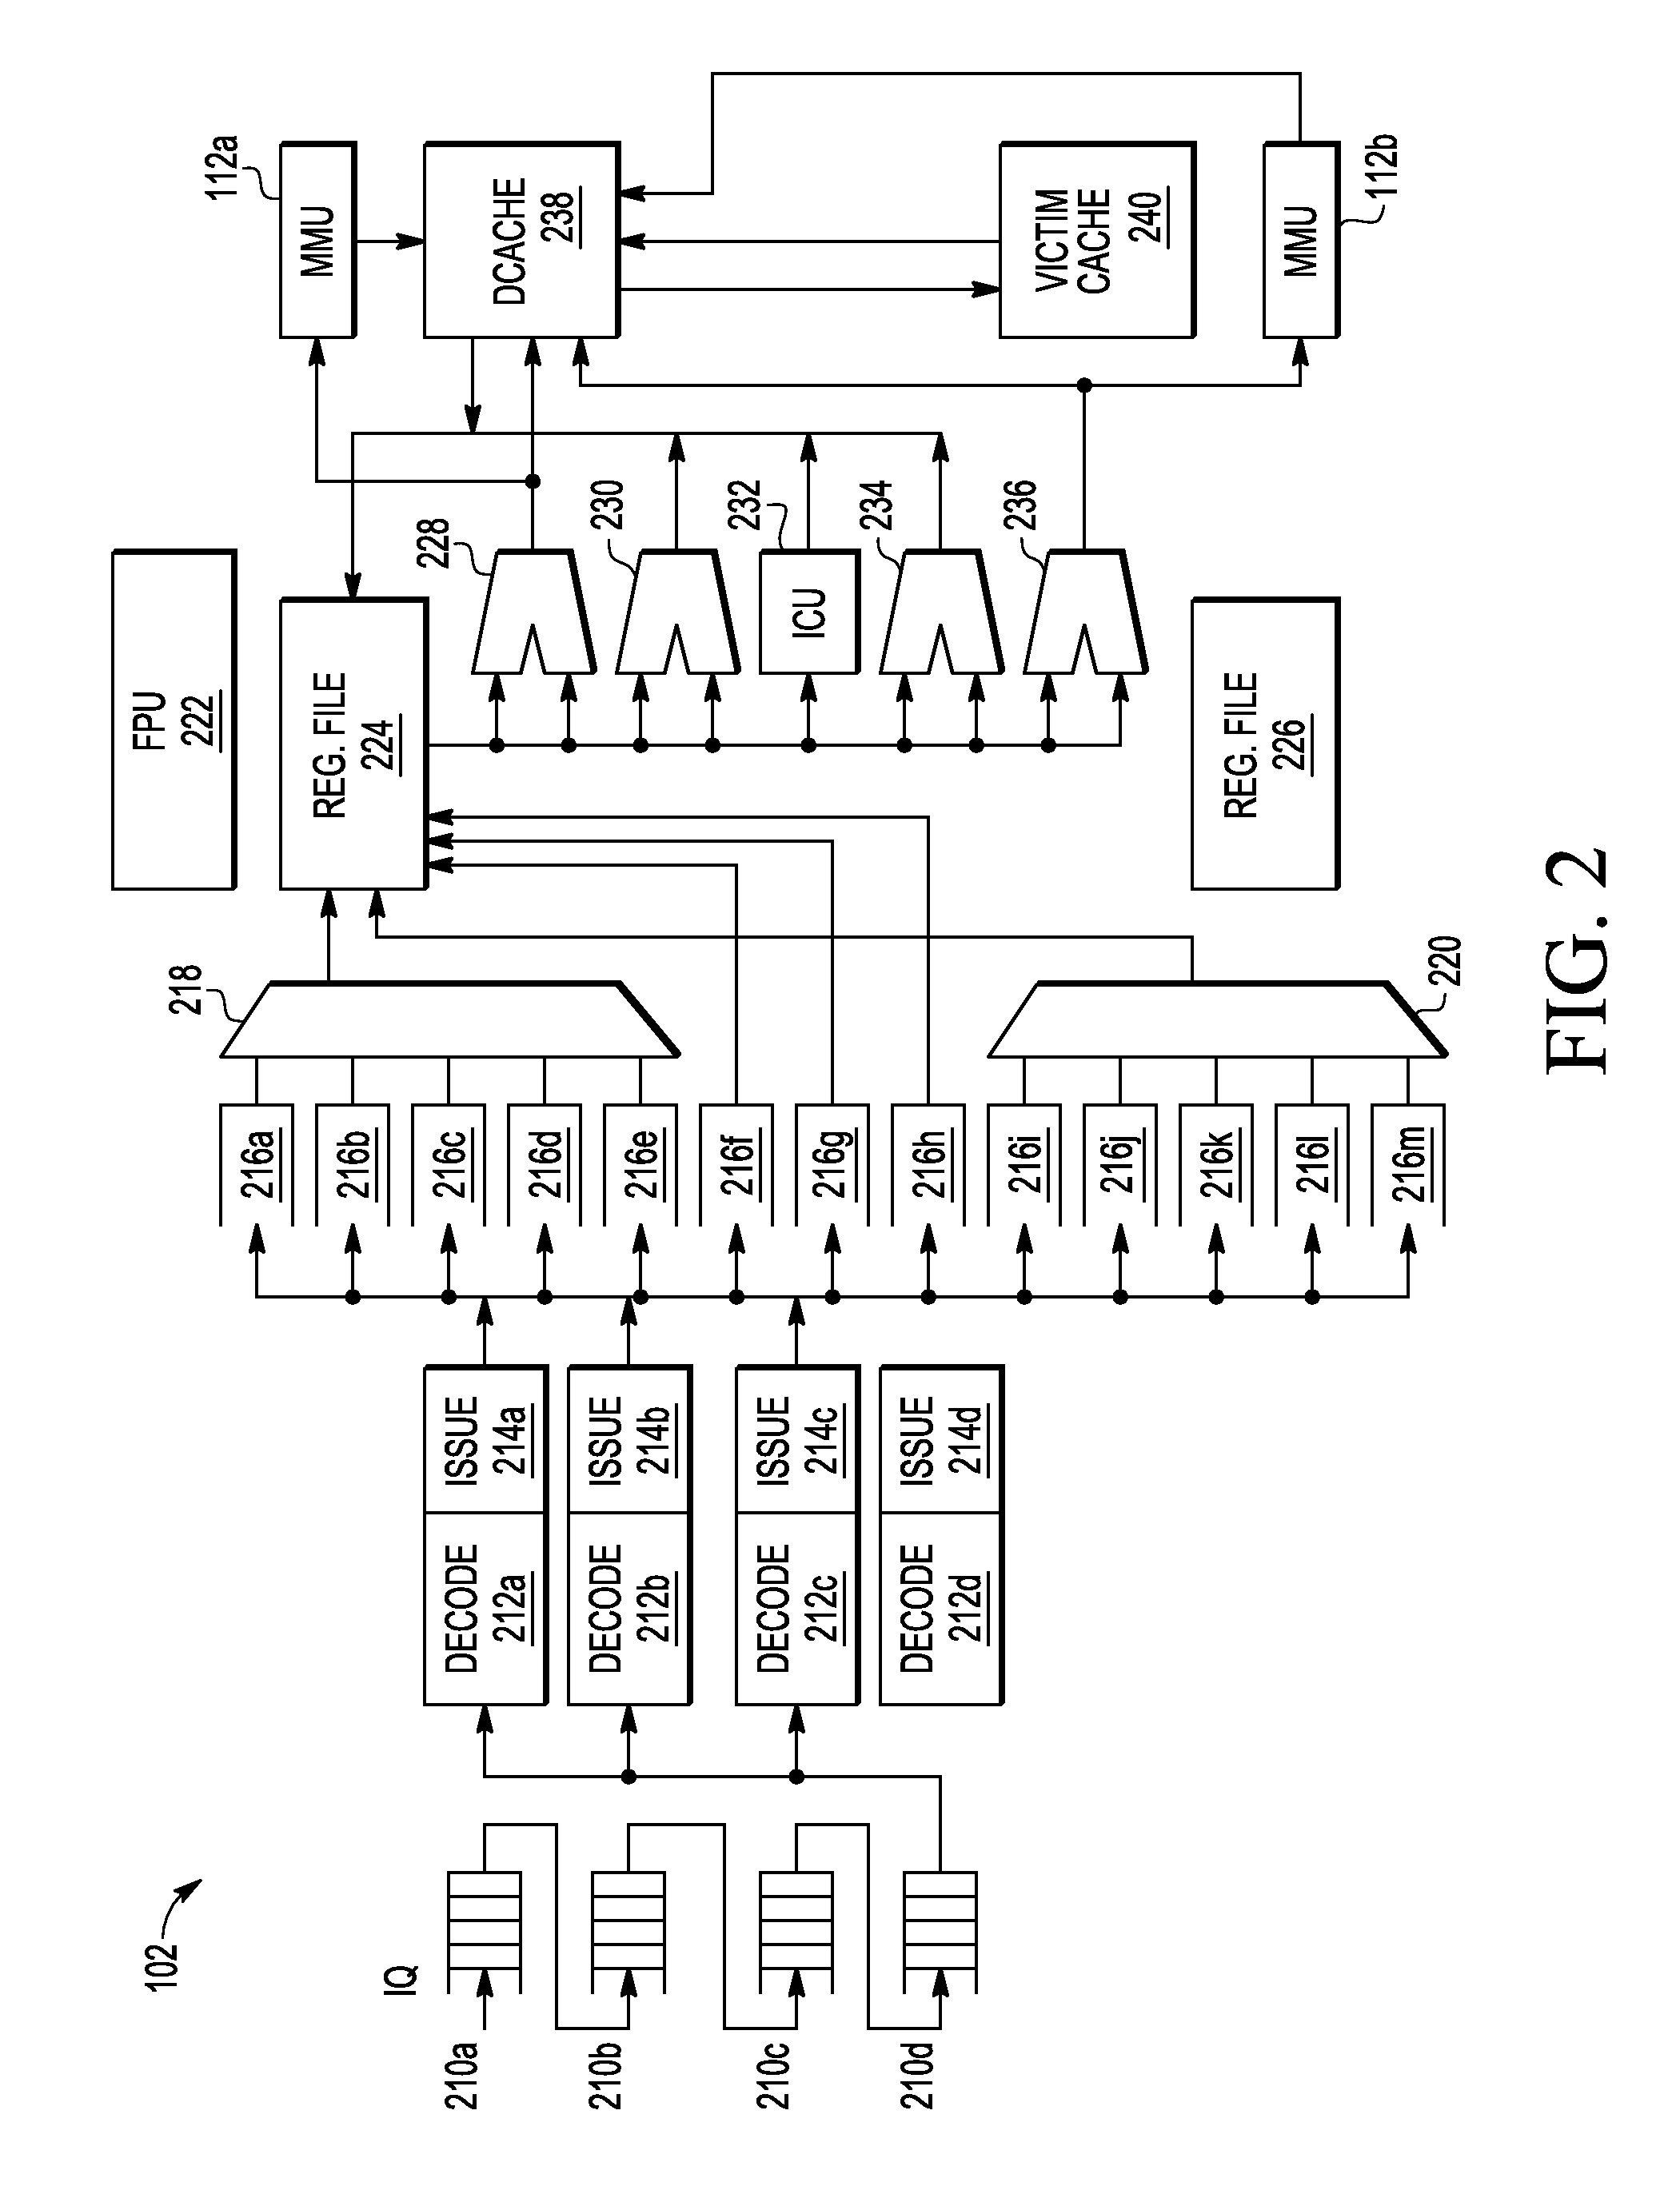 Systems and methods for reconfiguring cache memory